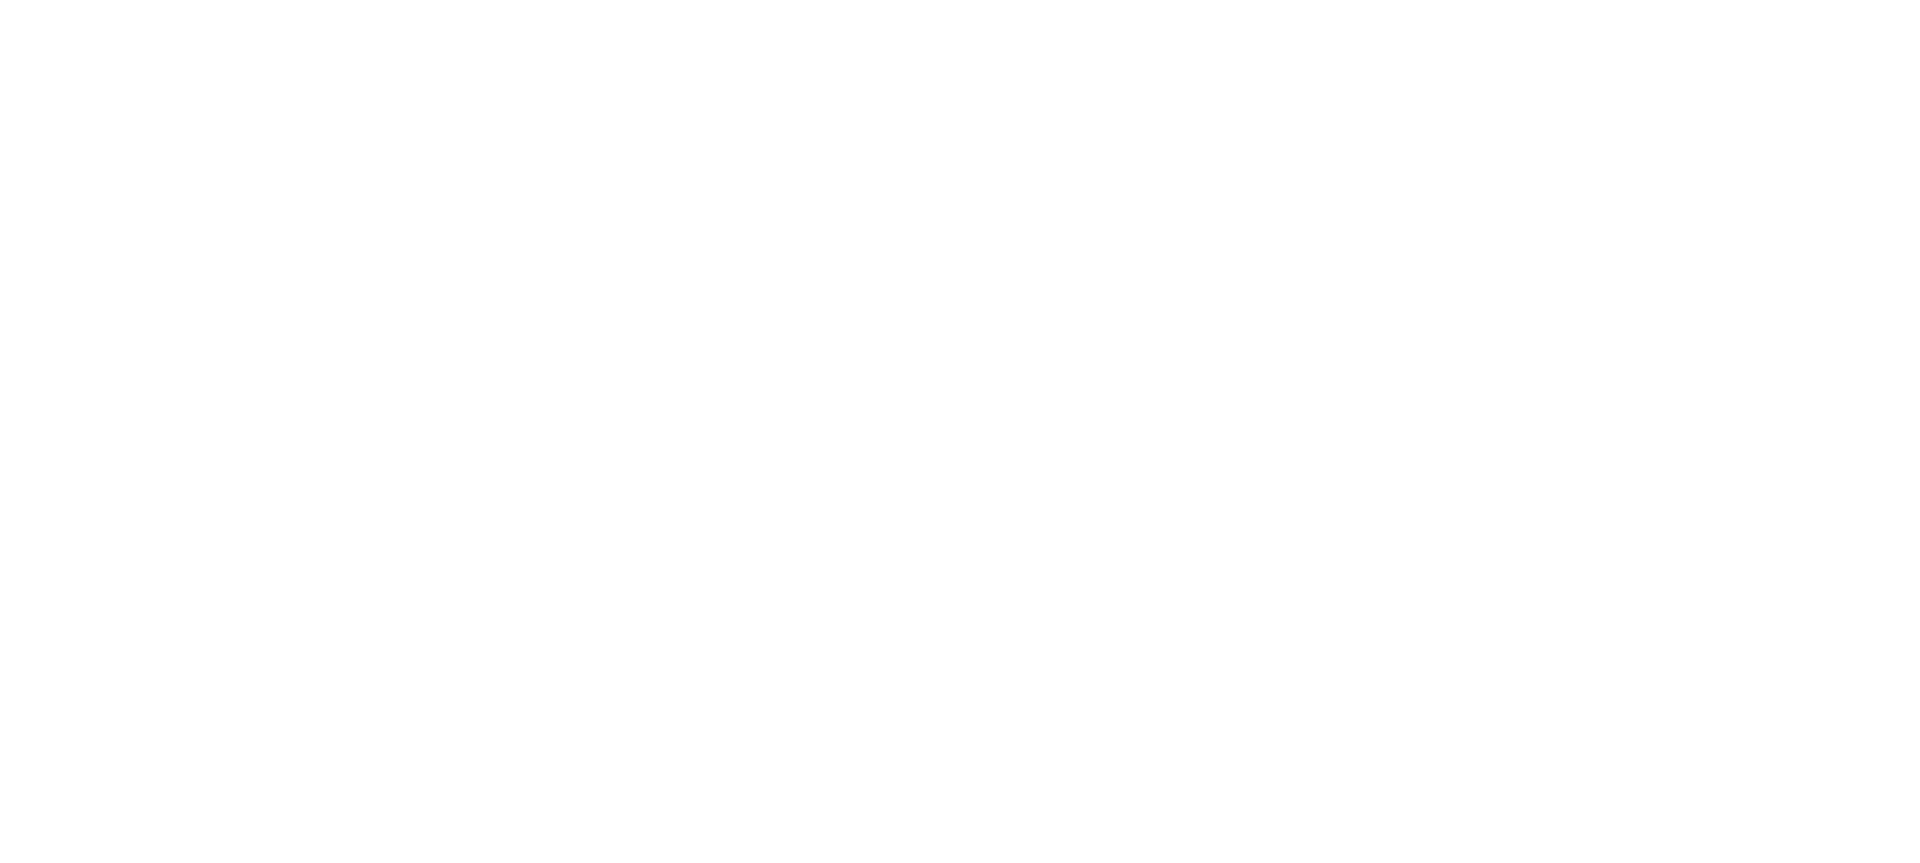 Avis logo - footer, go to home page